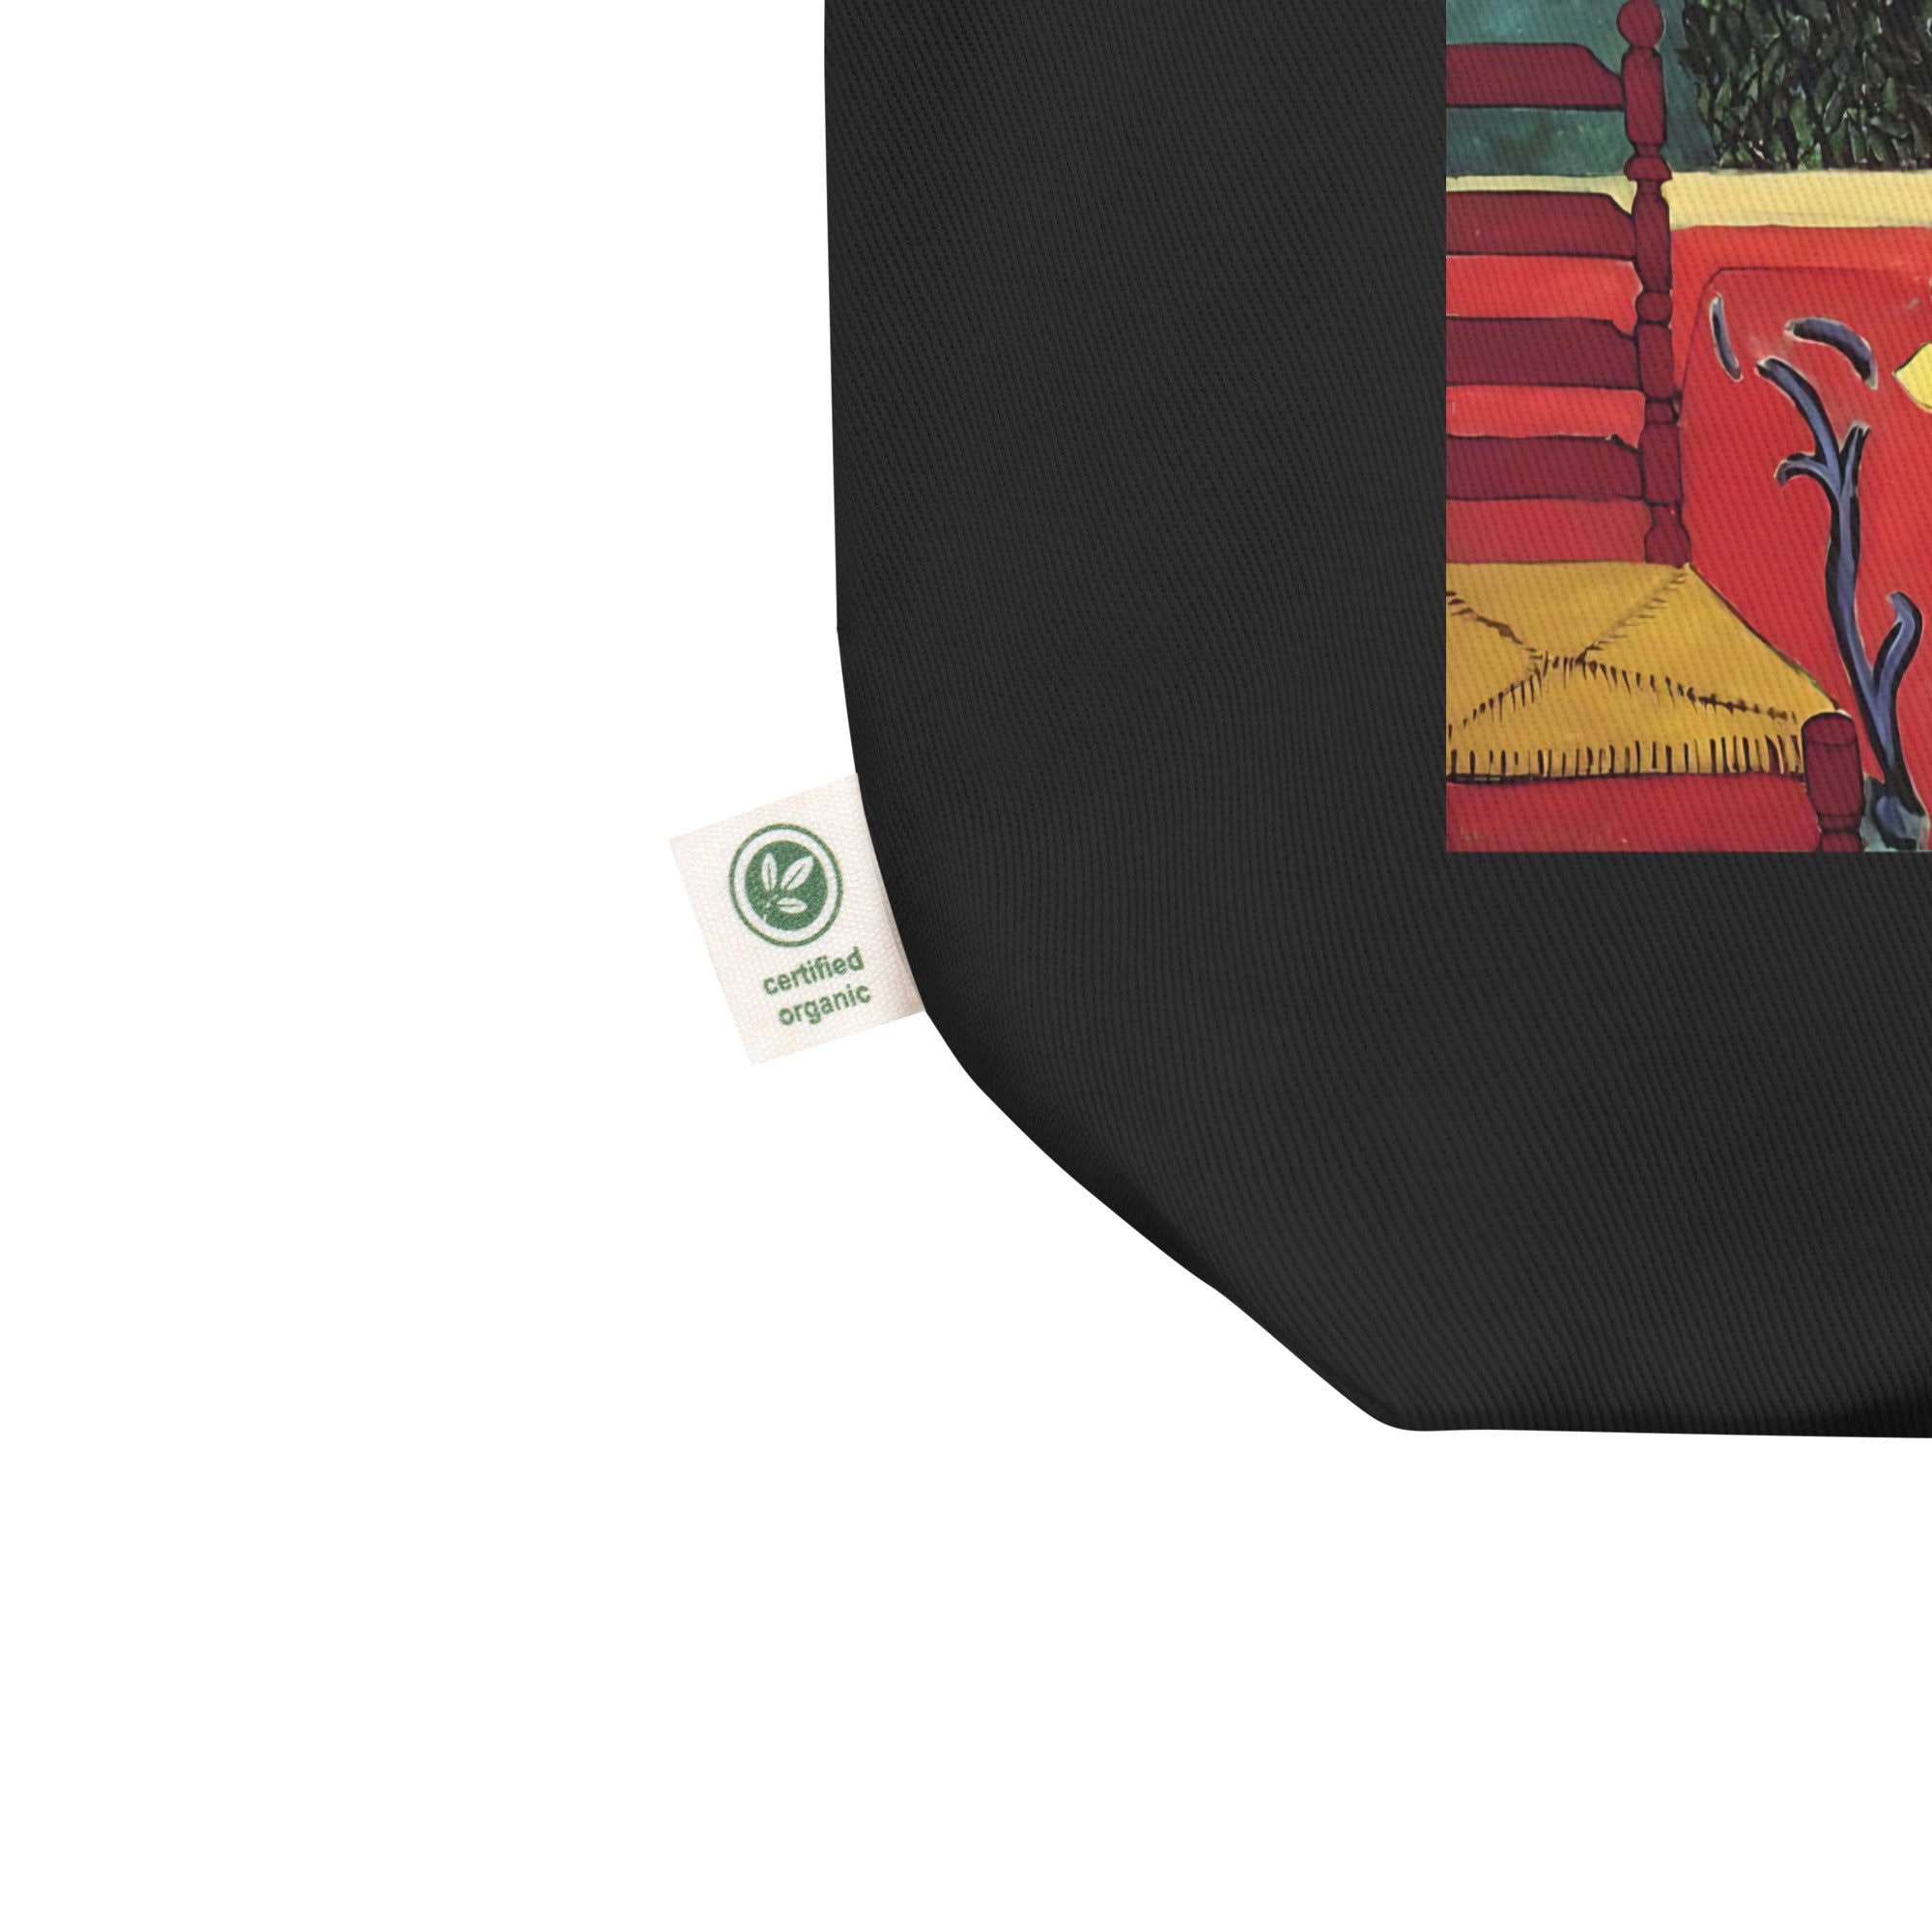 Henri Matisse 'The Red Room' Famous Painting Totebag | Eco Friendly Art Tote Bag